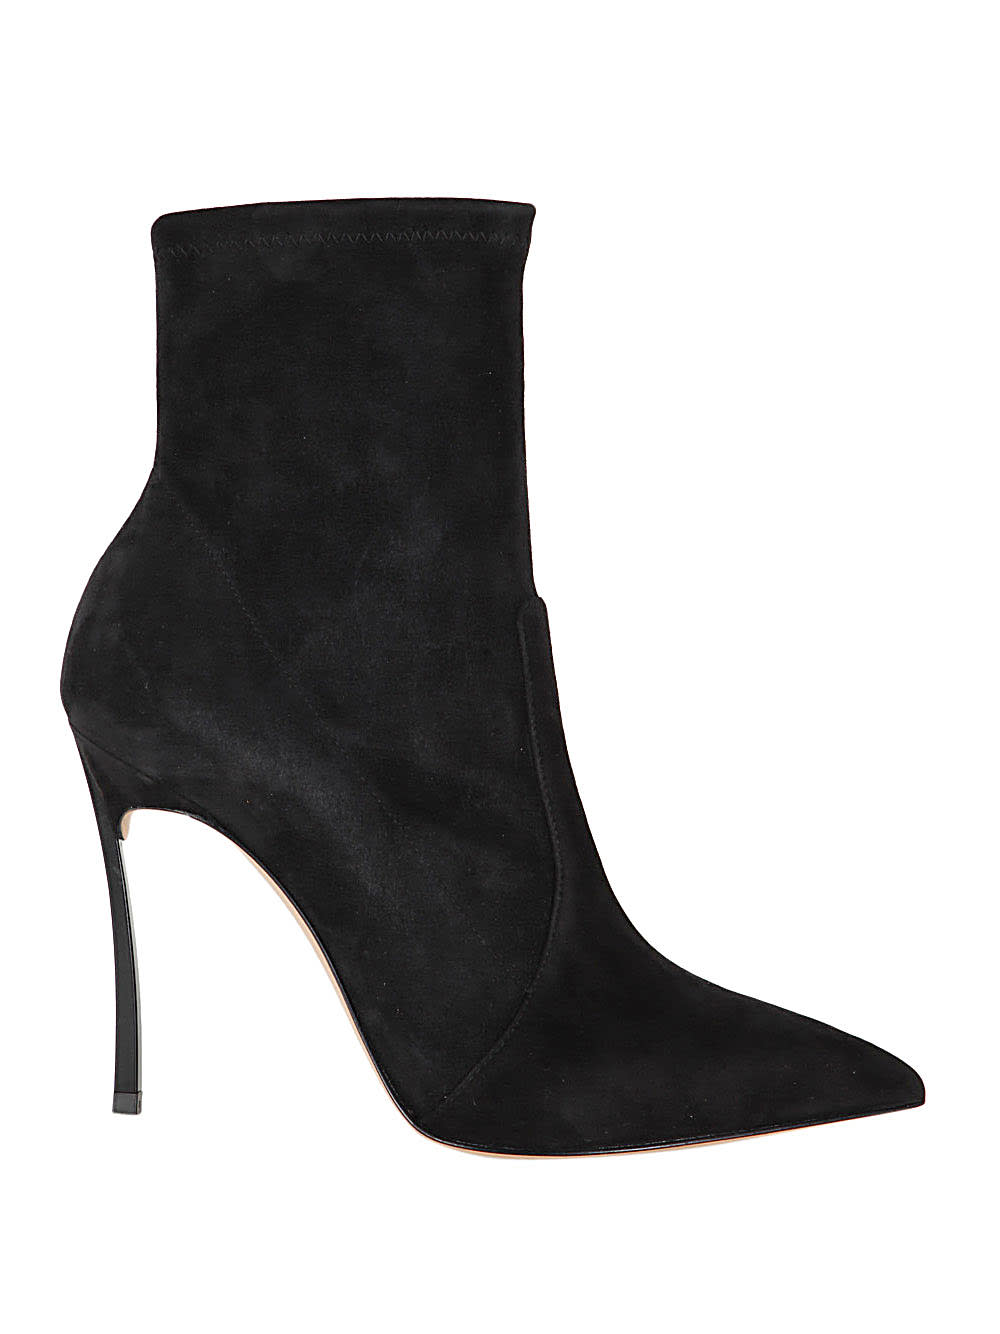 Casadei Polacco Cam. High Heel Ankle Boots